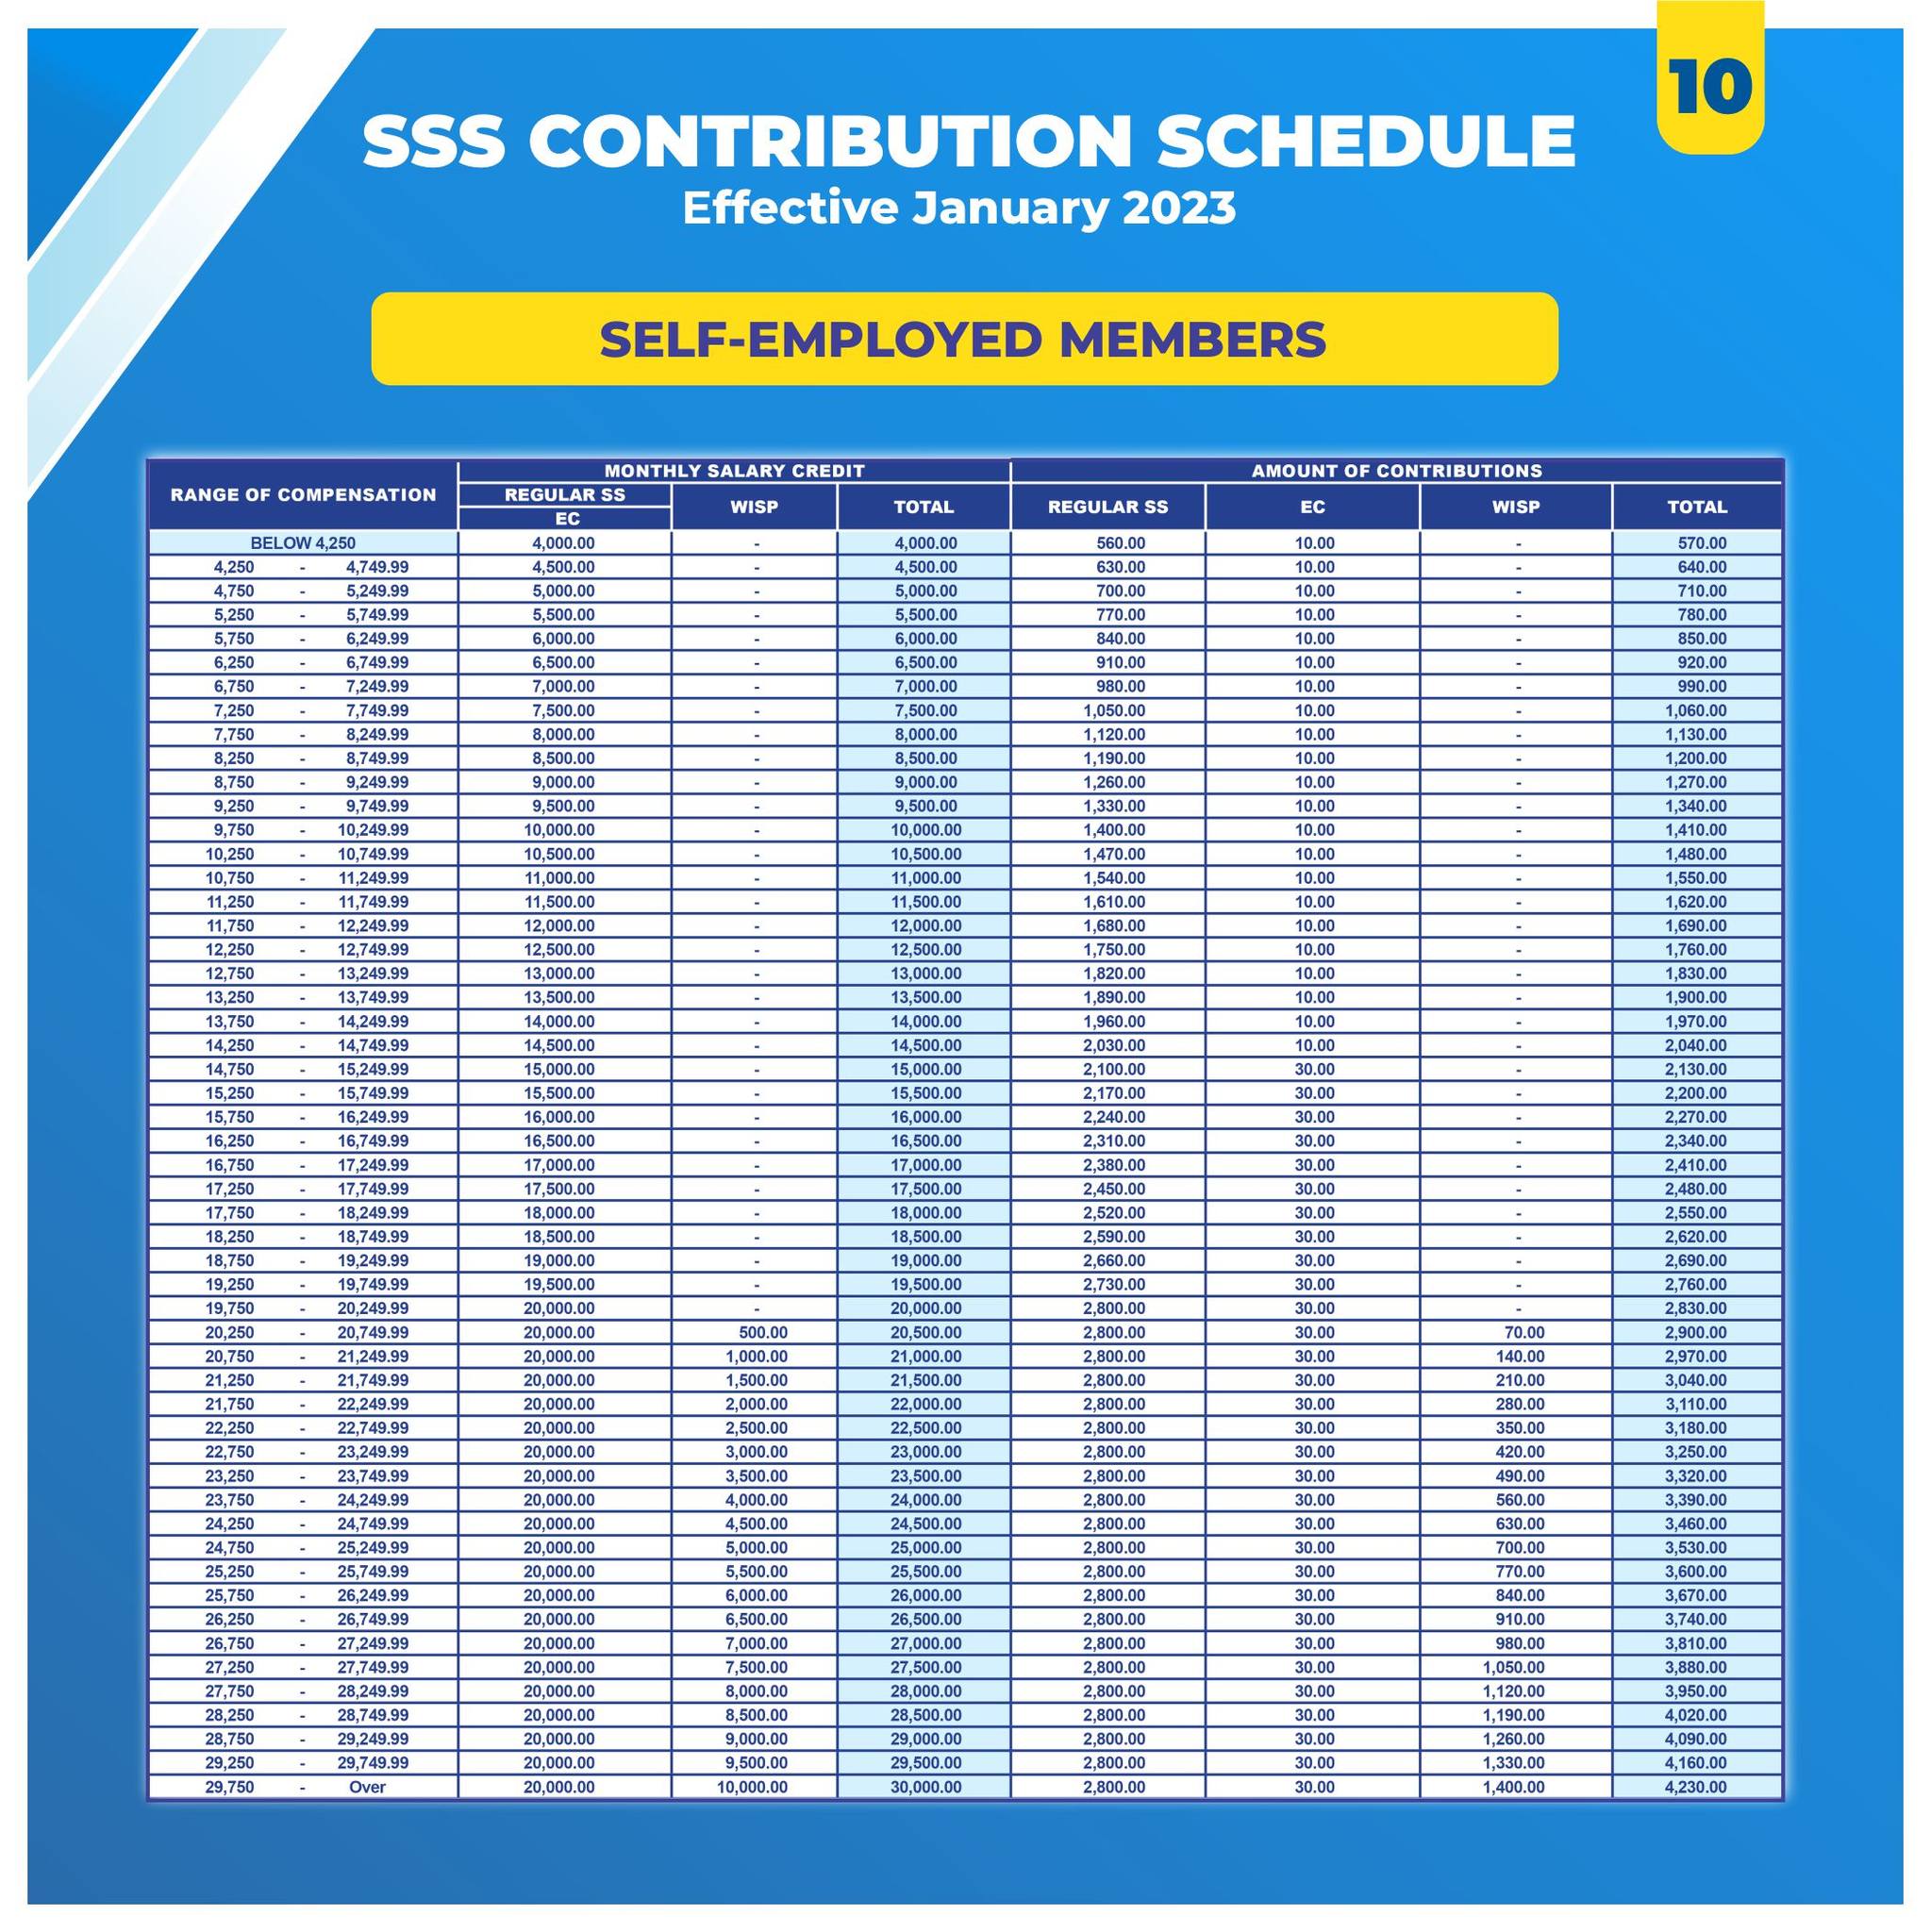 wisp sss contribution - for self-employed members